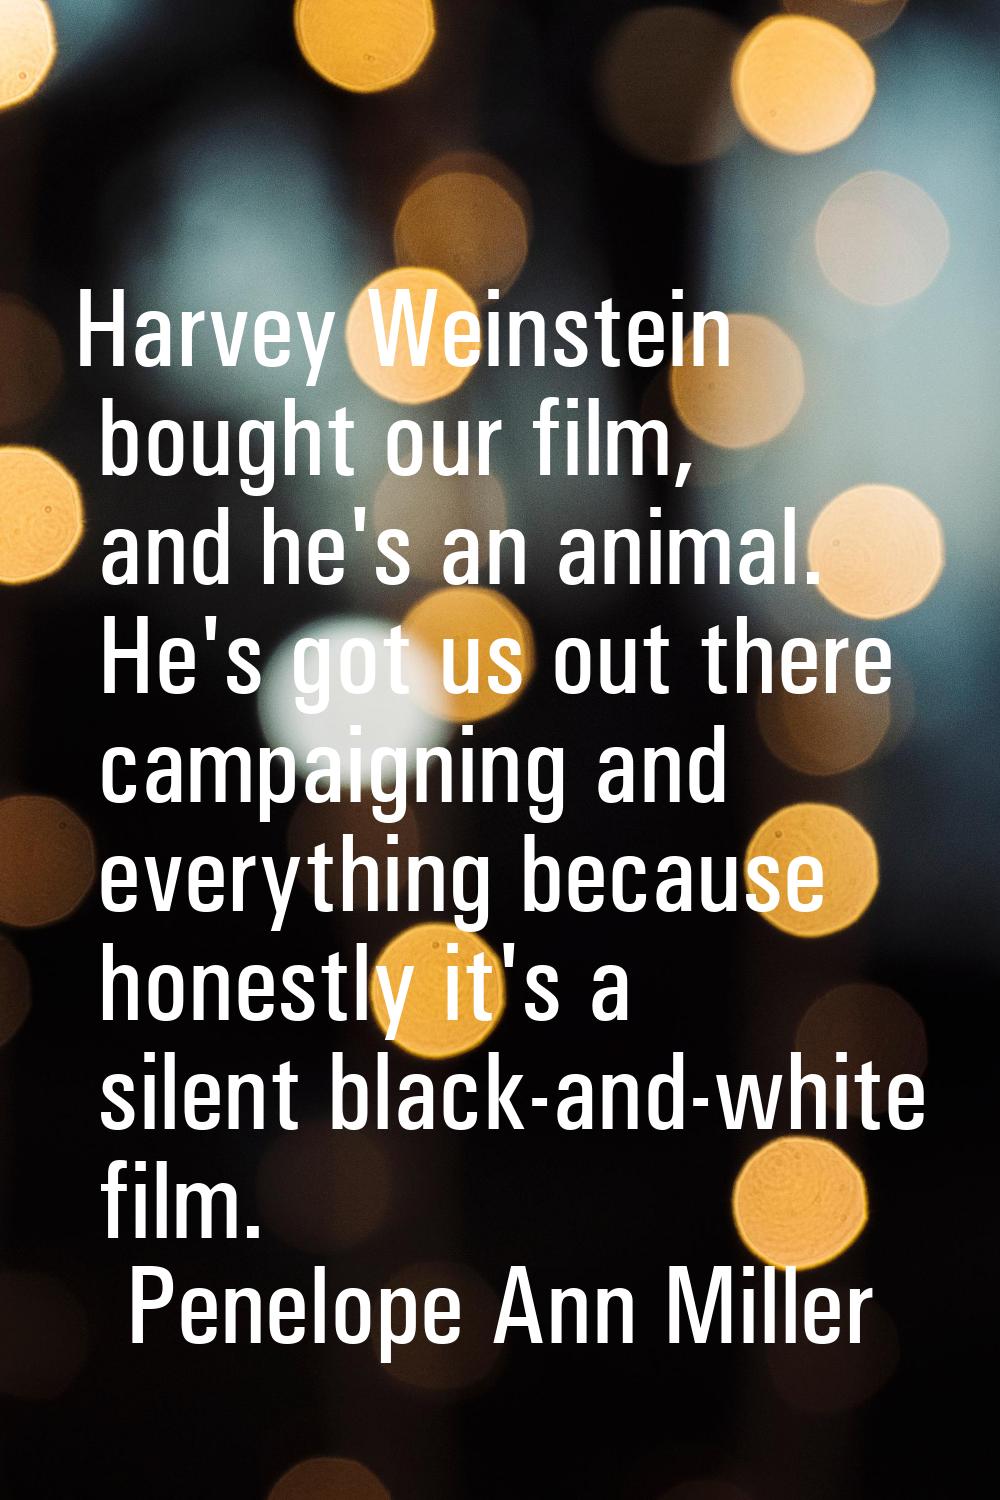 Harvey Weinstein bought our film, and he's an animal. He's got us out there campaigning and everyth